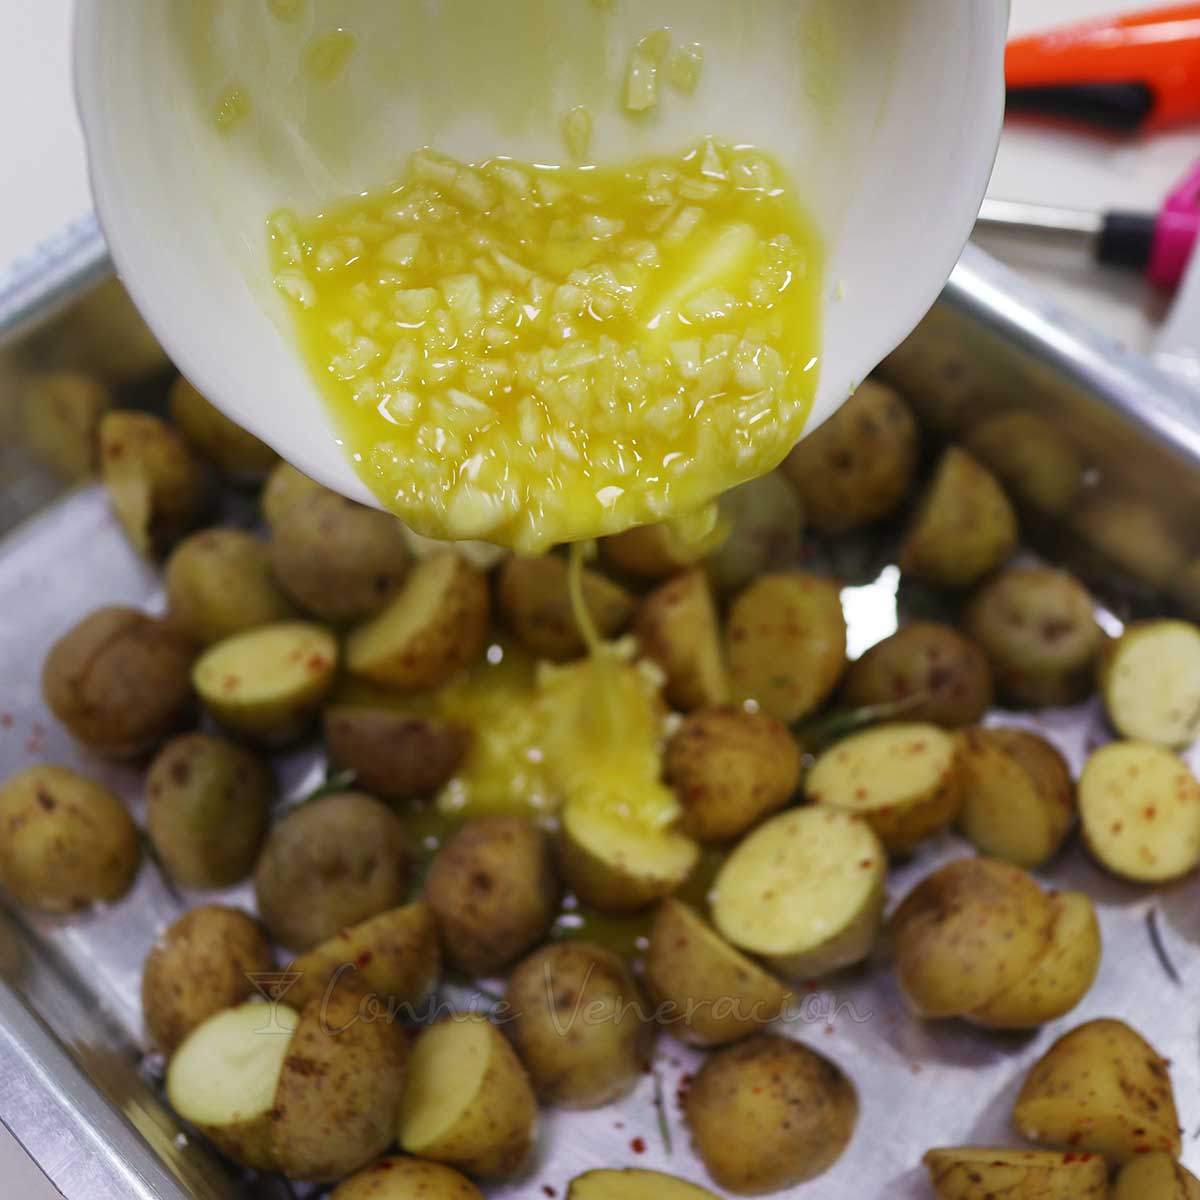 Pouring melted butter and garlic over halved baby potatoes in baking tray